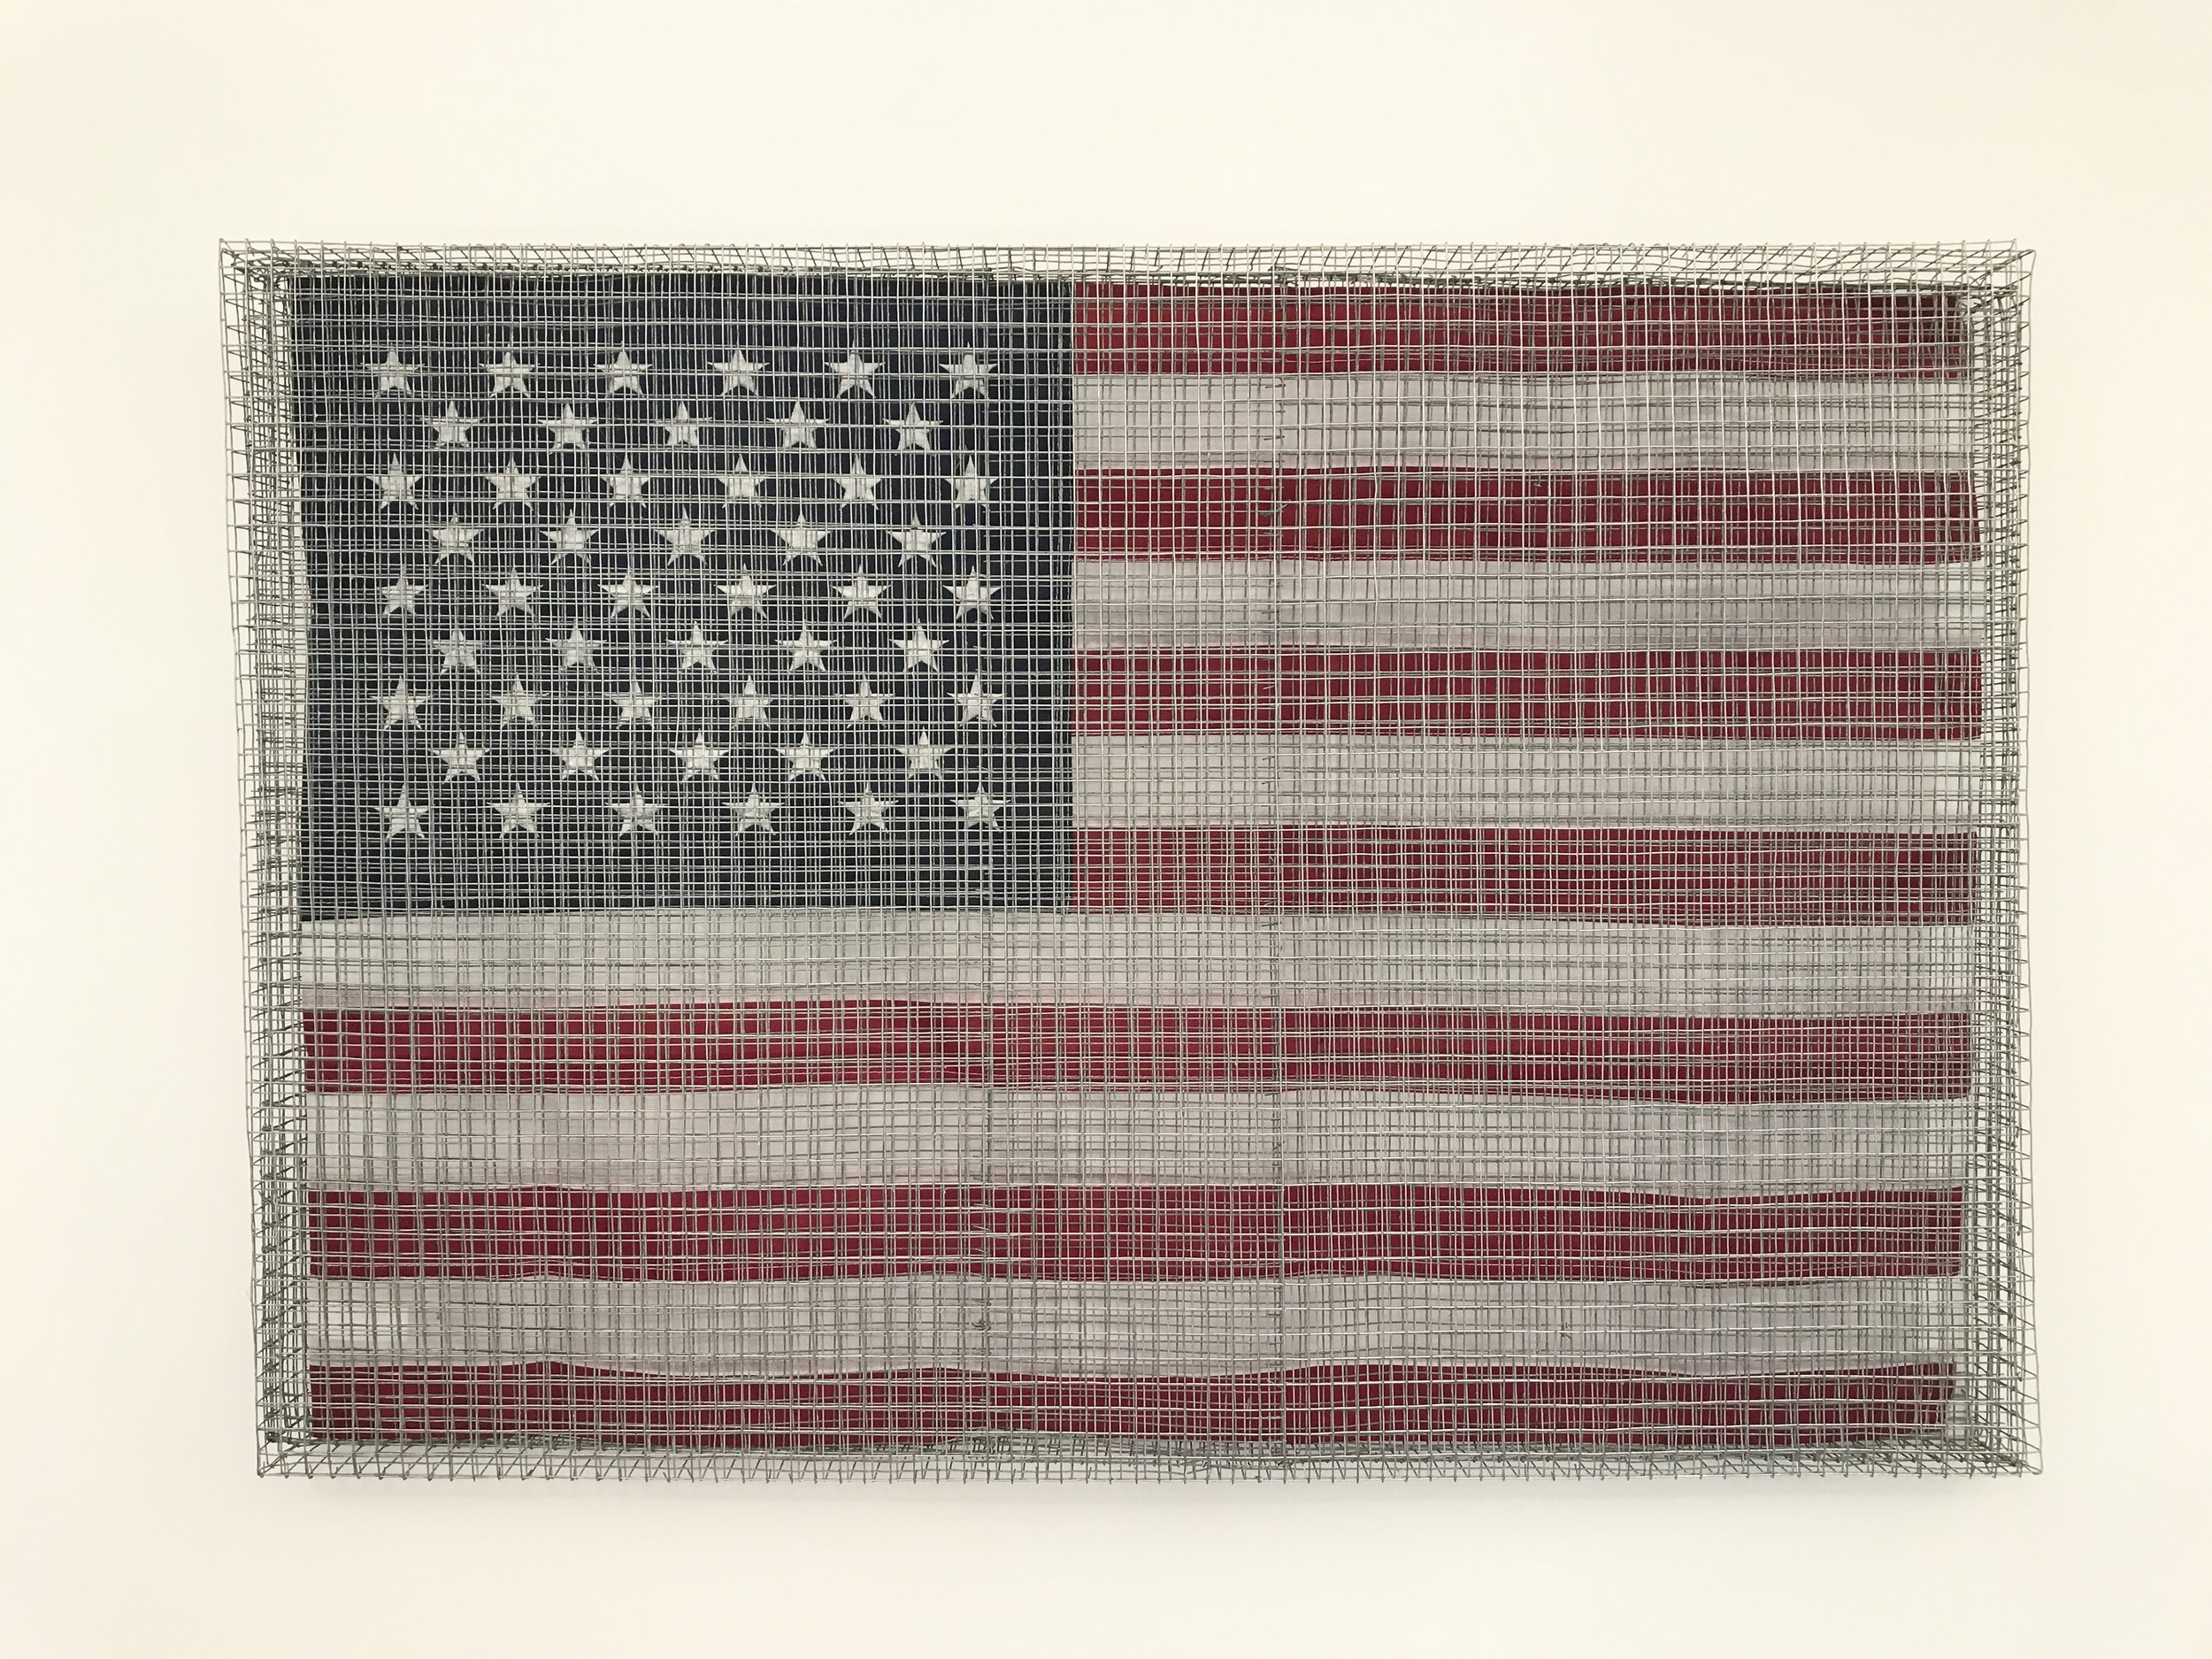  Doug Cross,  Give Me Your Tired, Your Poor, Your Huddled Masses , Wire and cloth, 2’x3’ 